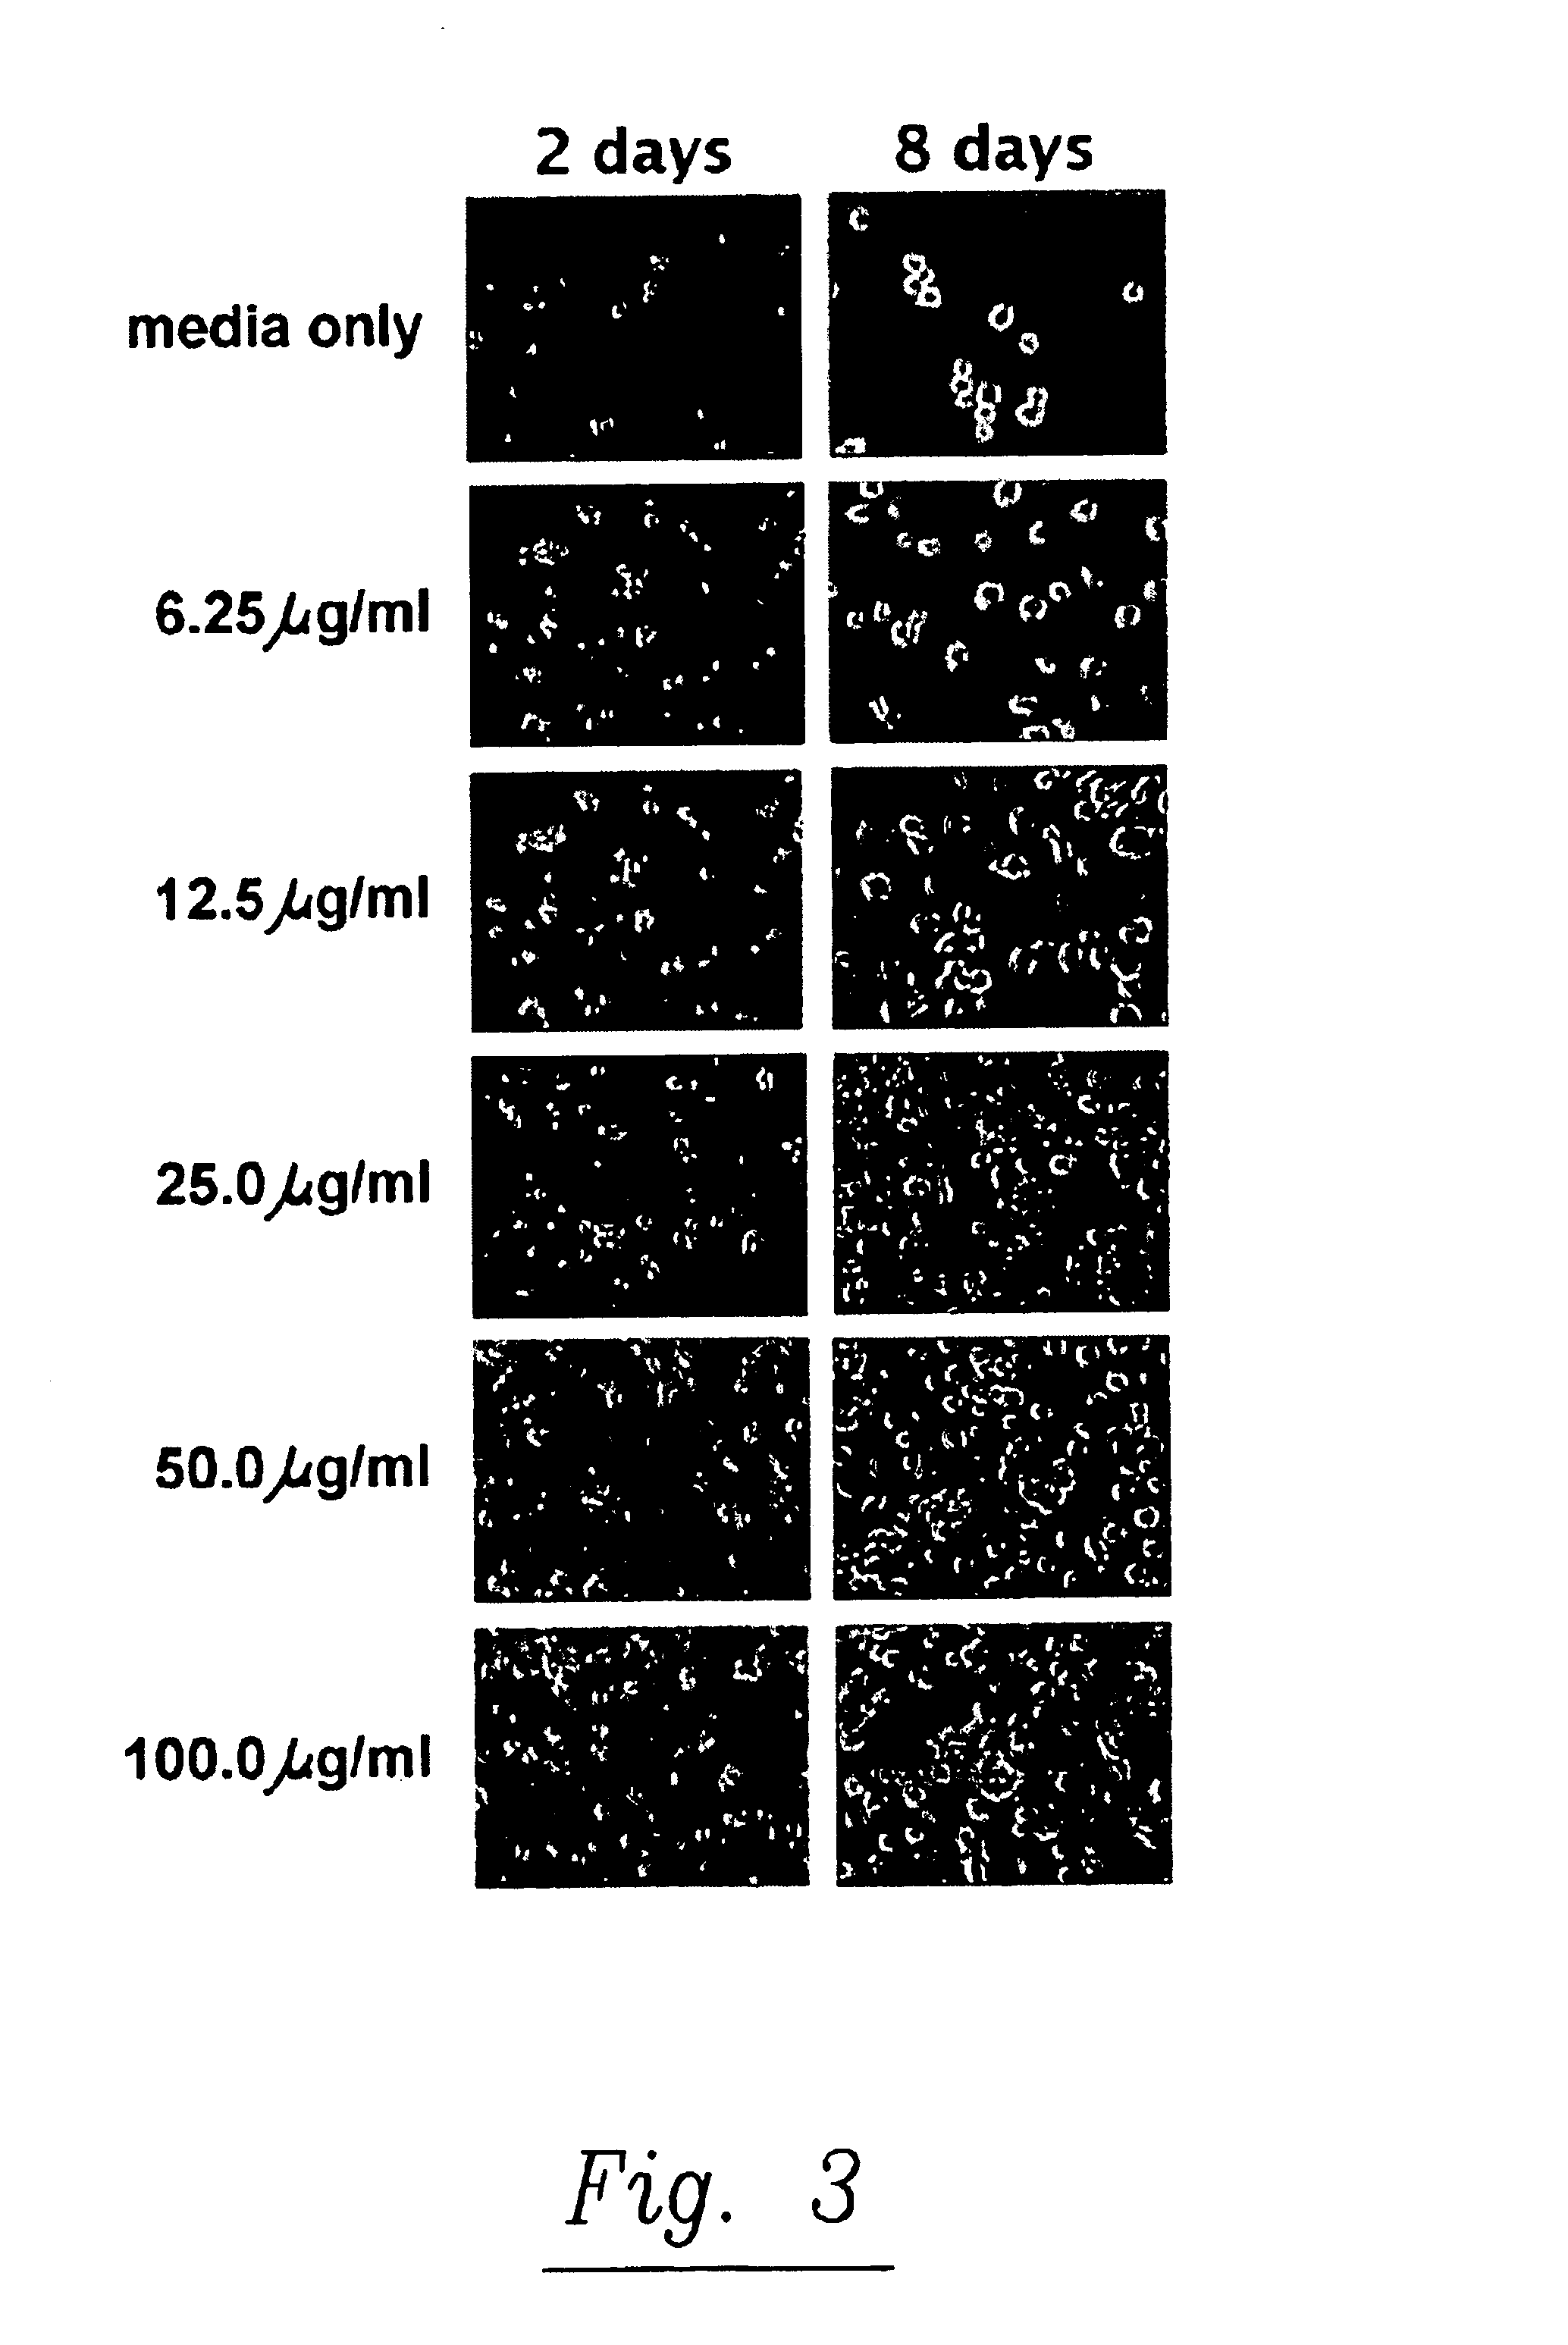 Pine cone extracts and uses thereof